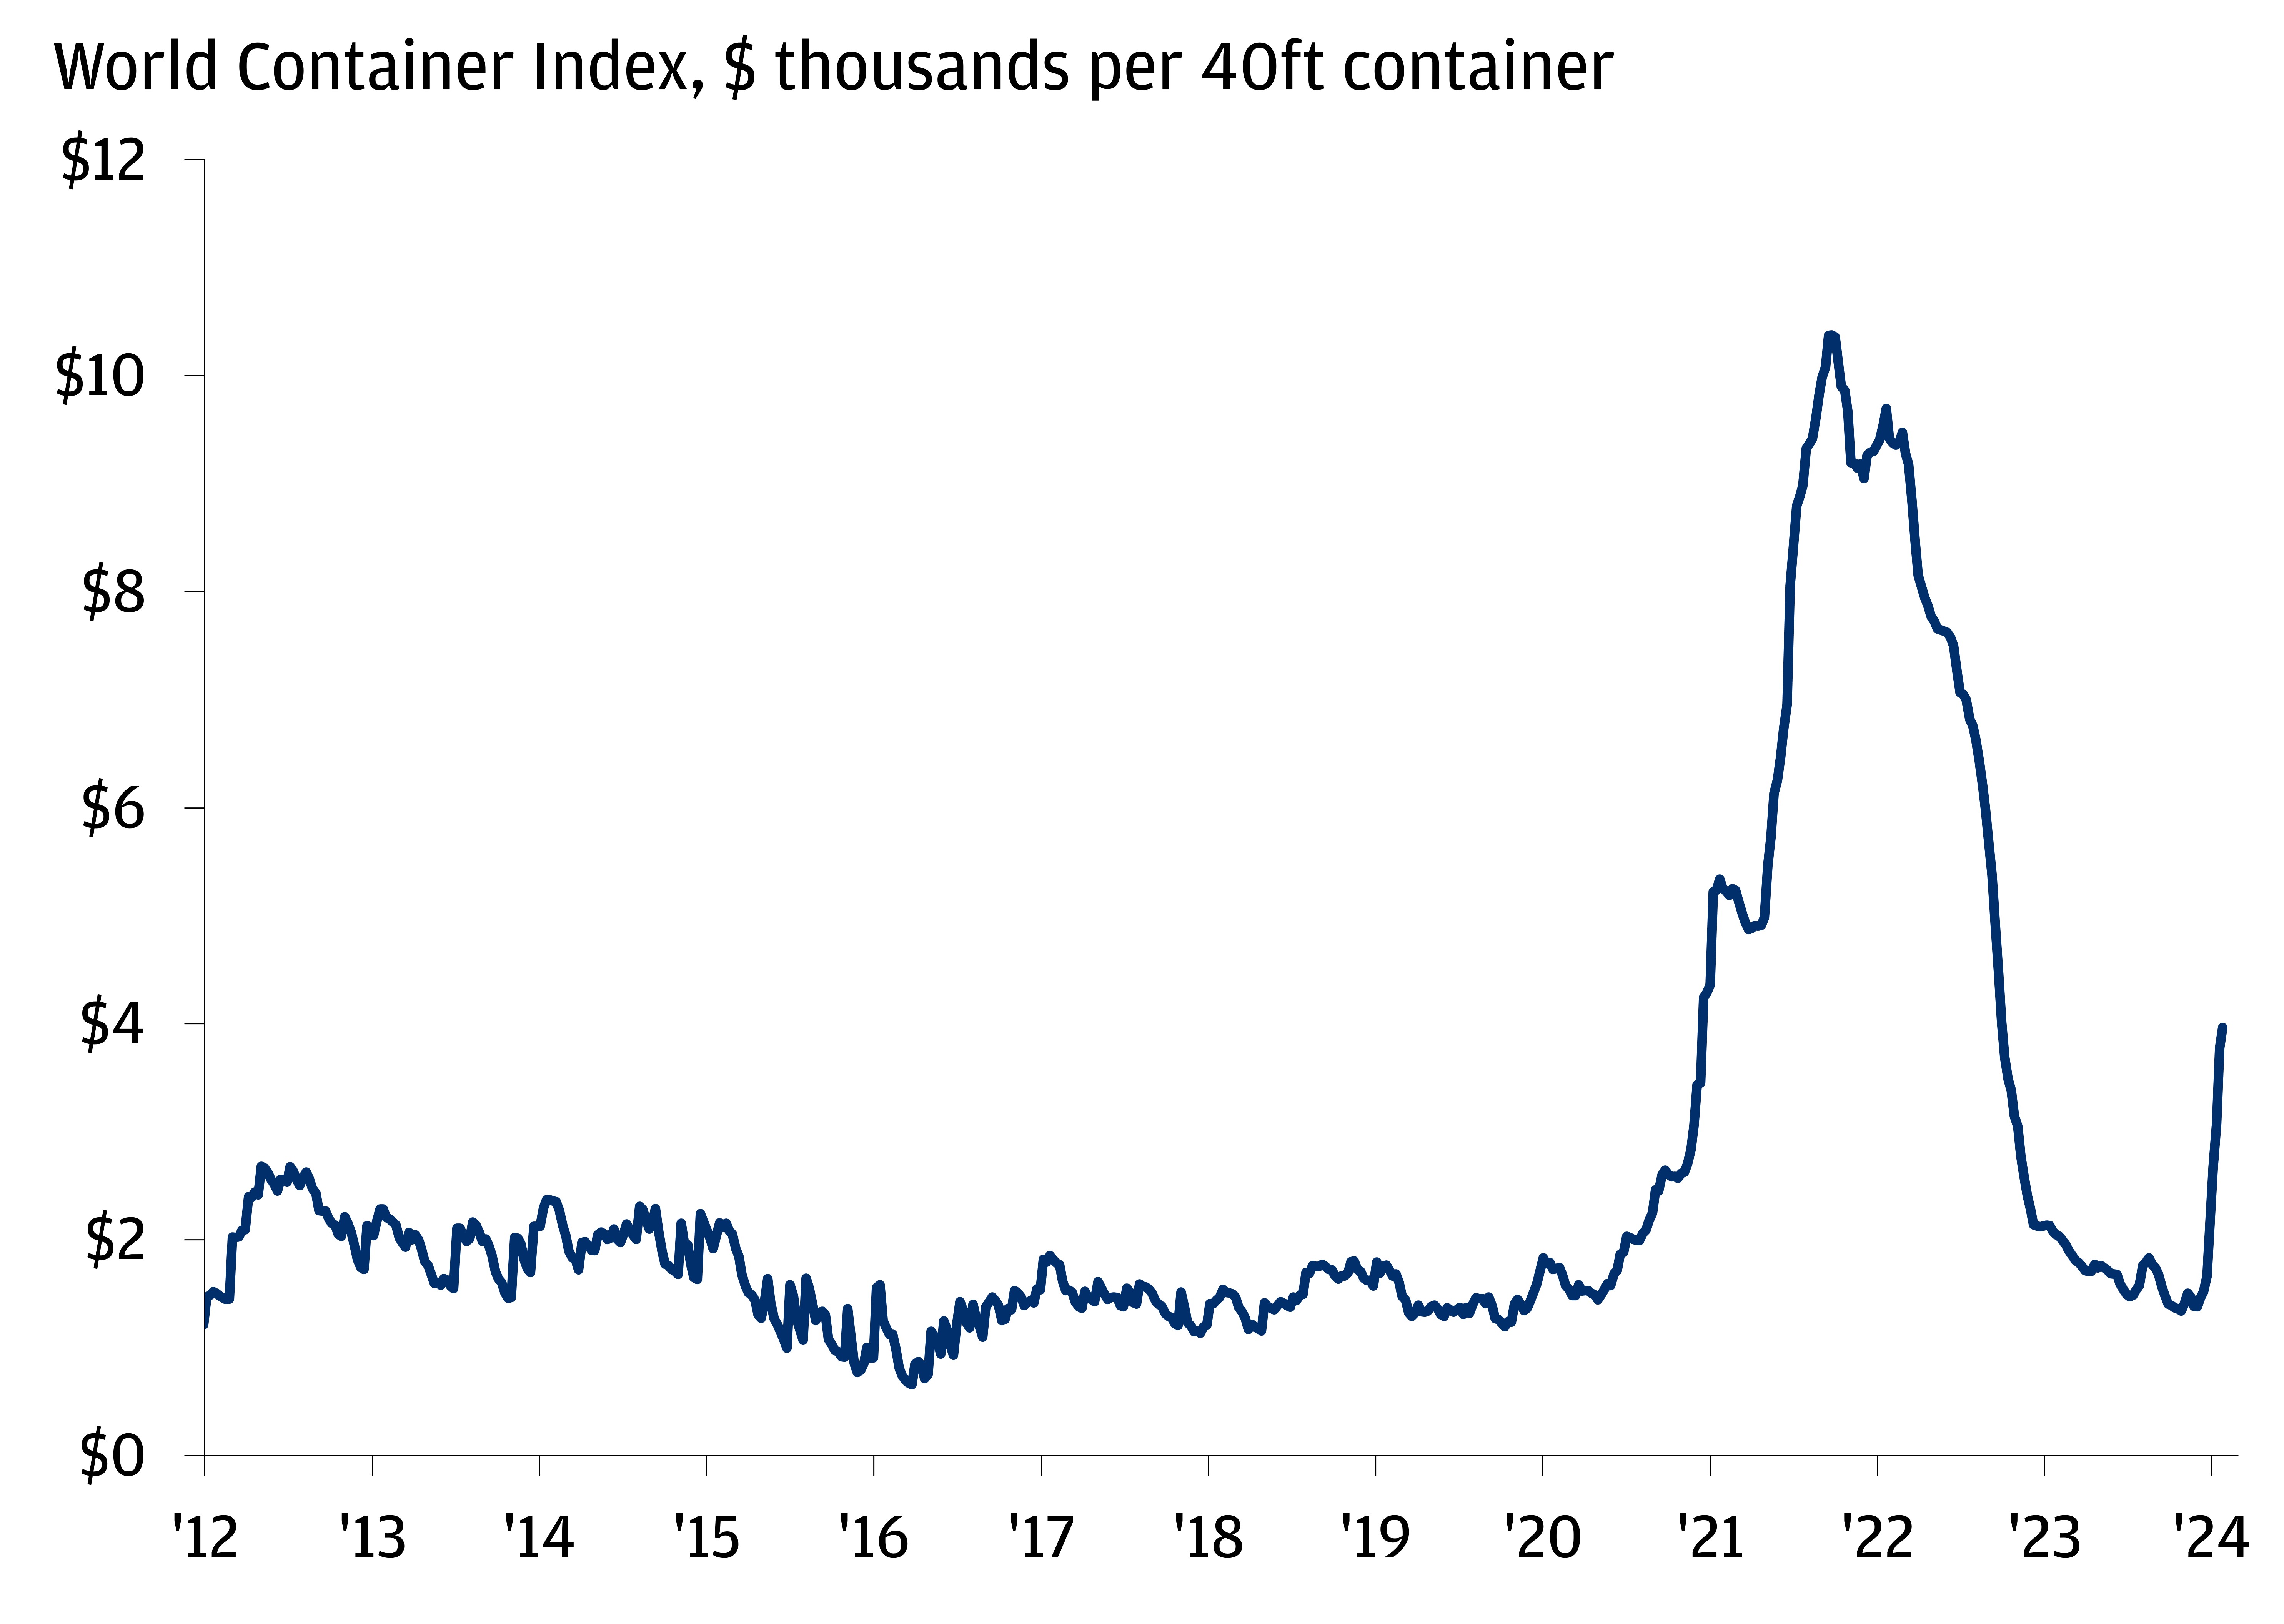 This chart shows the World Container Index in thousands of dollars per 40 foot container since 2012.